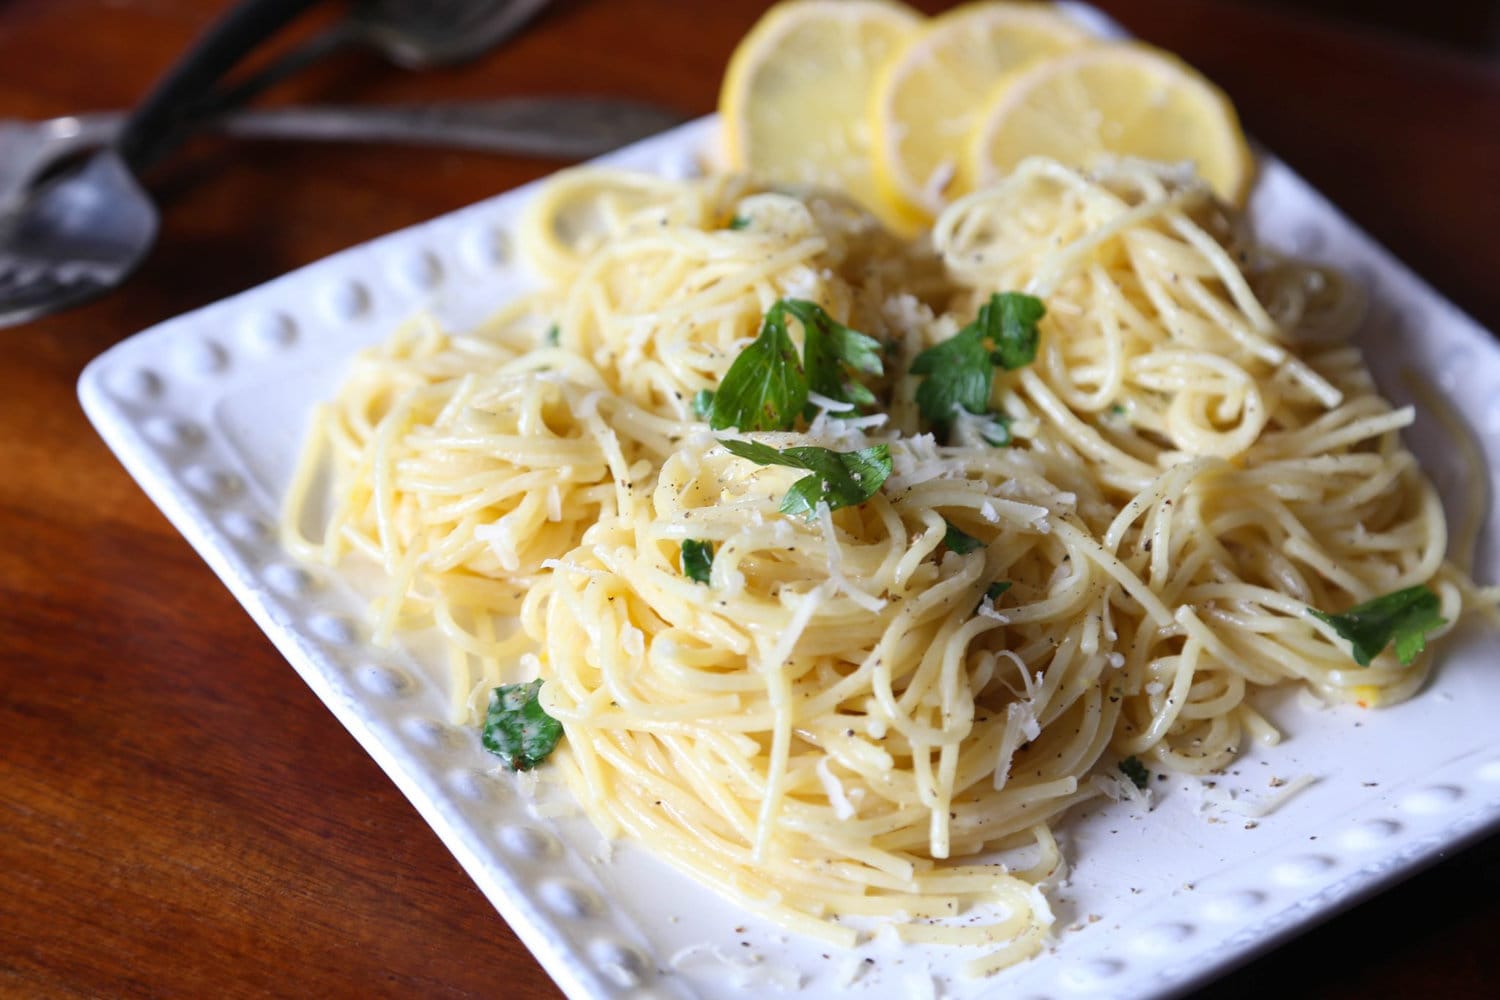 Lemon spaghetti served on a plate, garnished with fresh herbs and lemon slices.